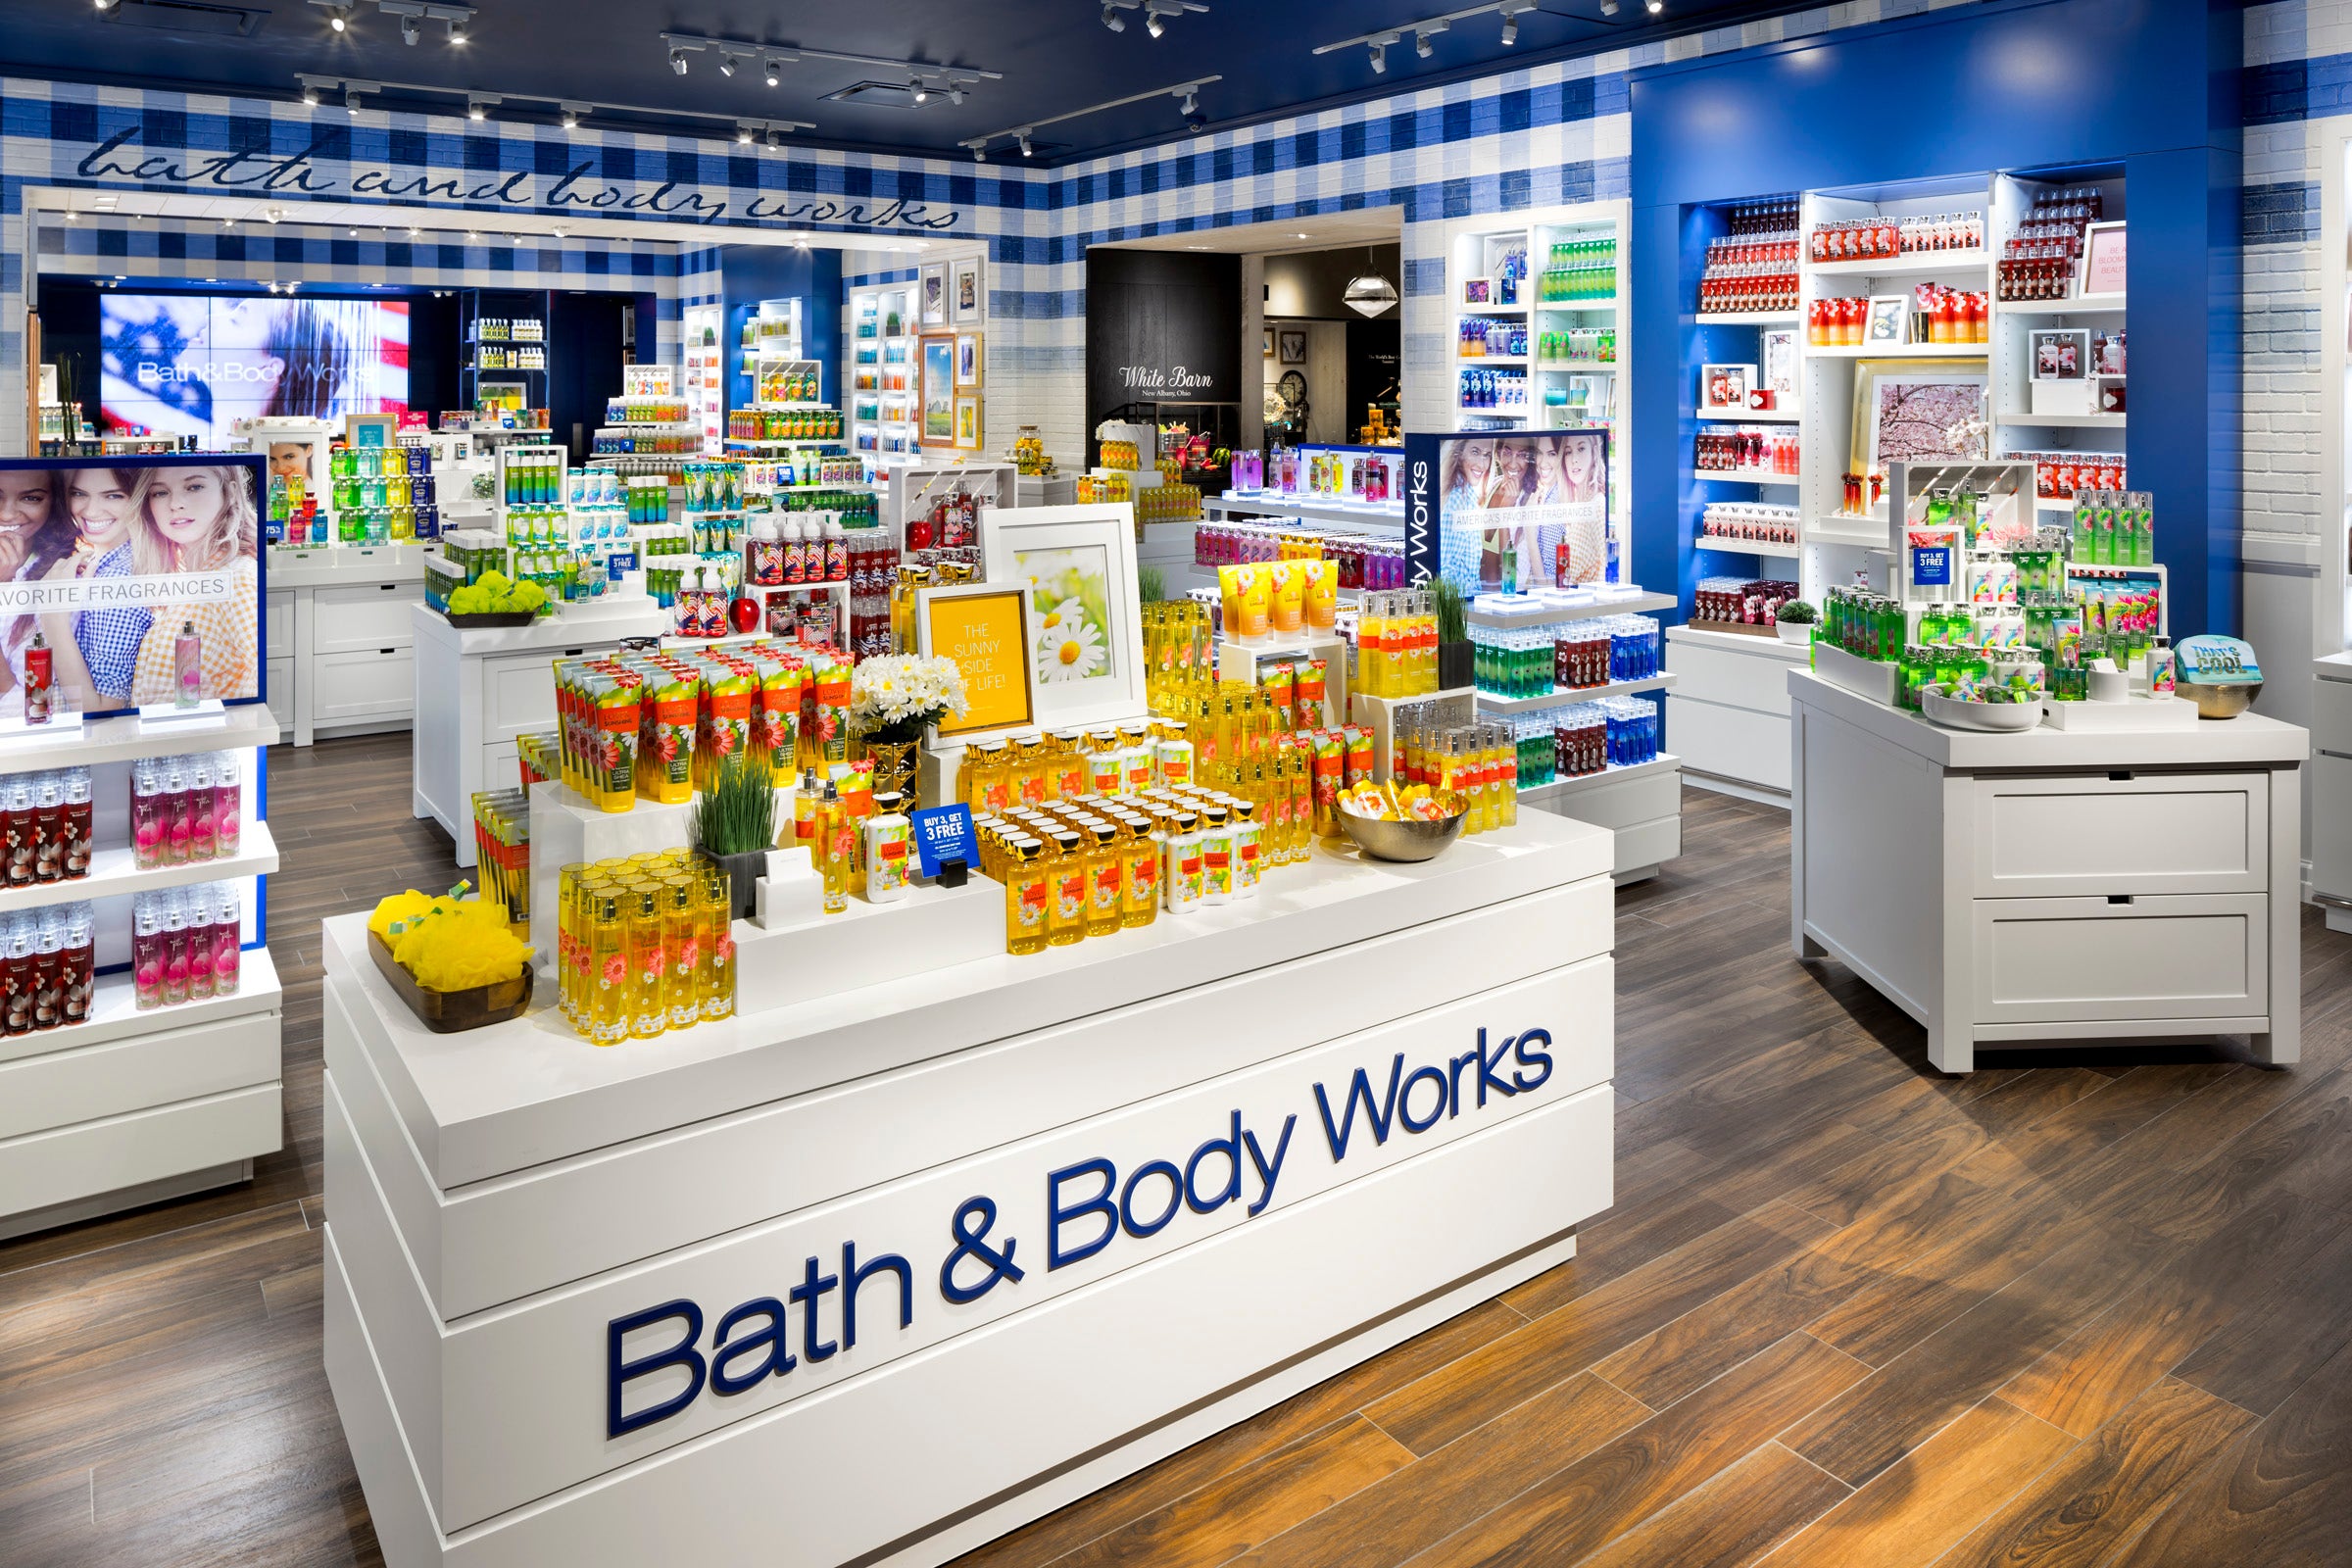 Bath & Body Works Stock Is Soaring After Hours: What's Going On?